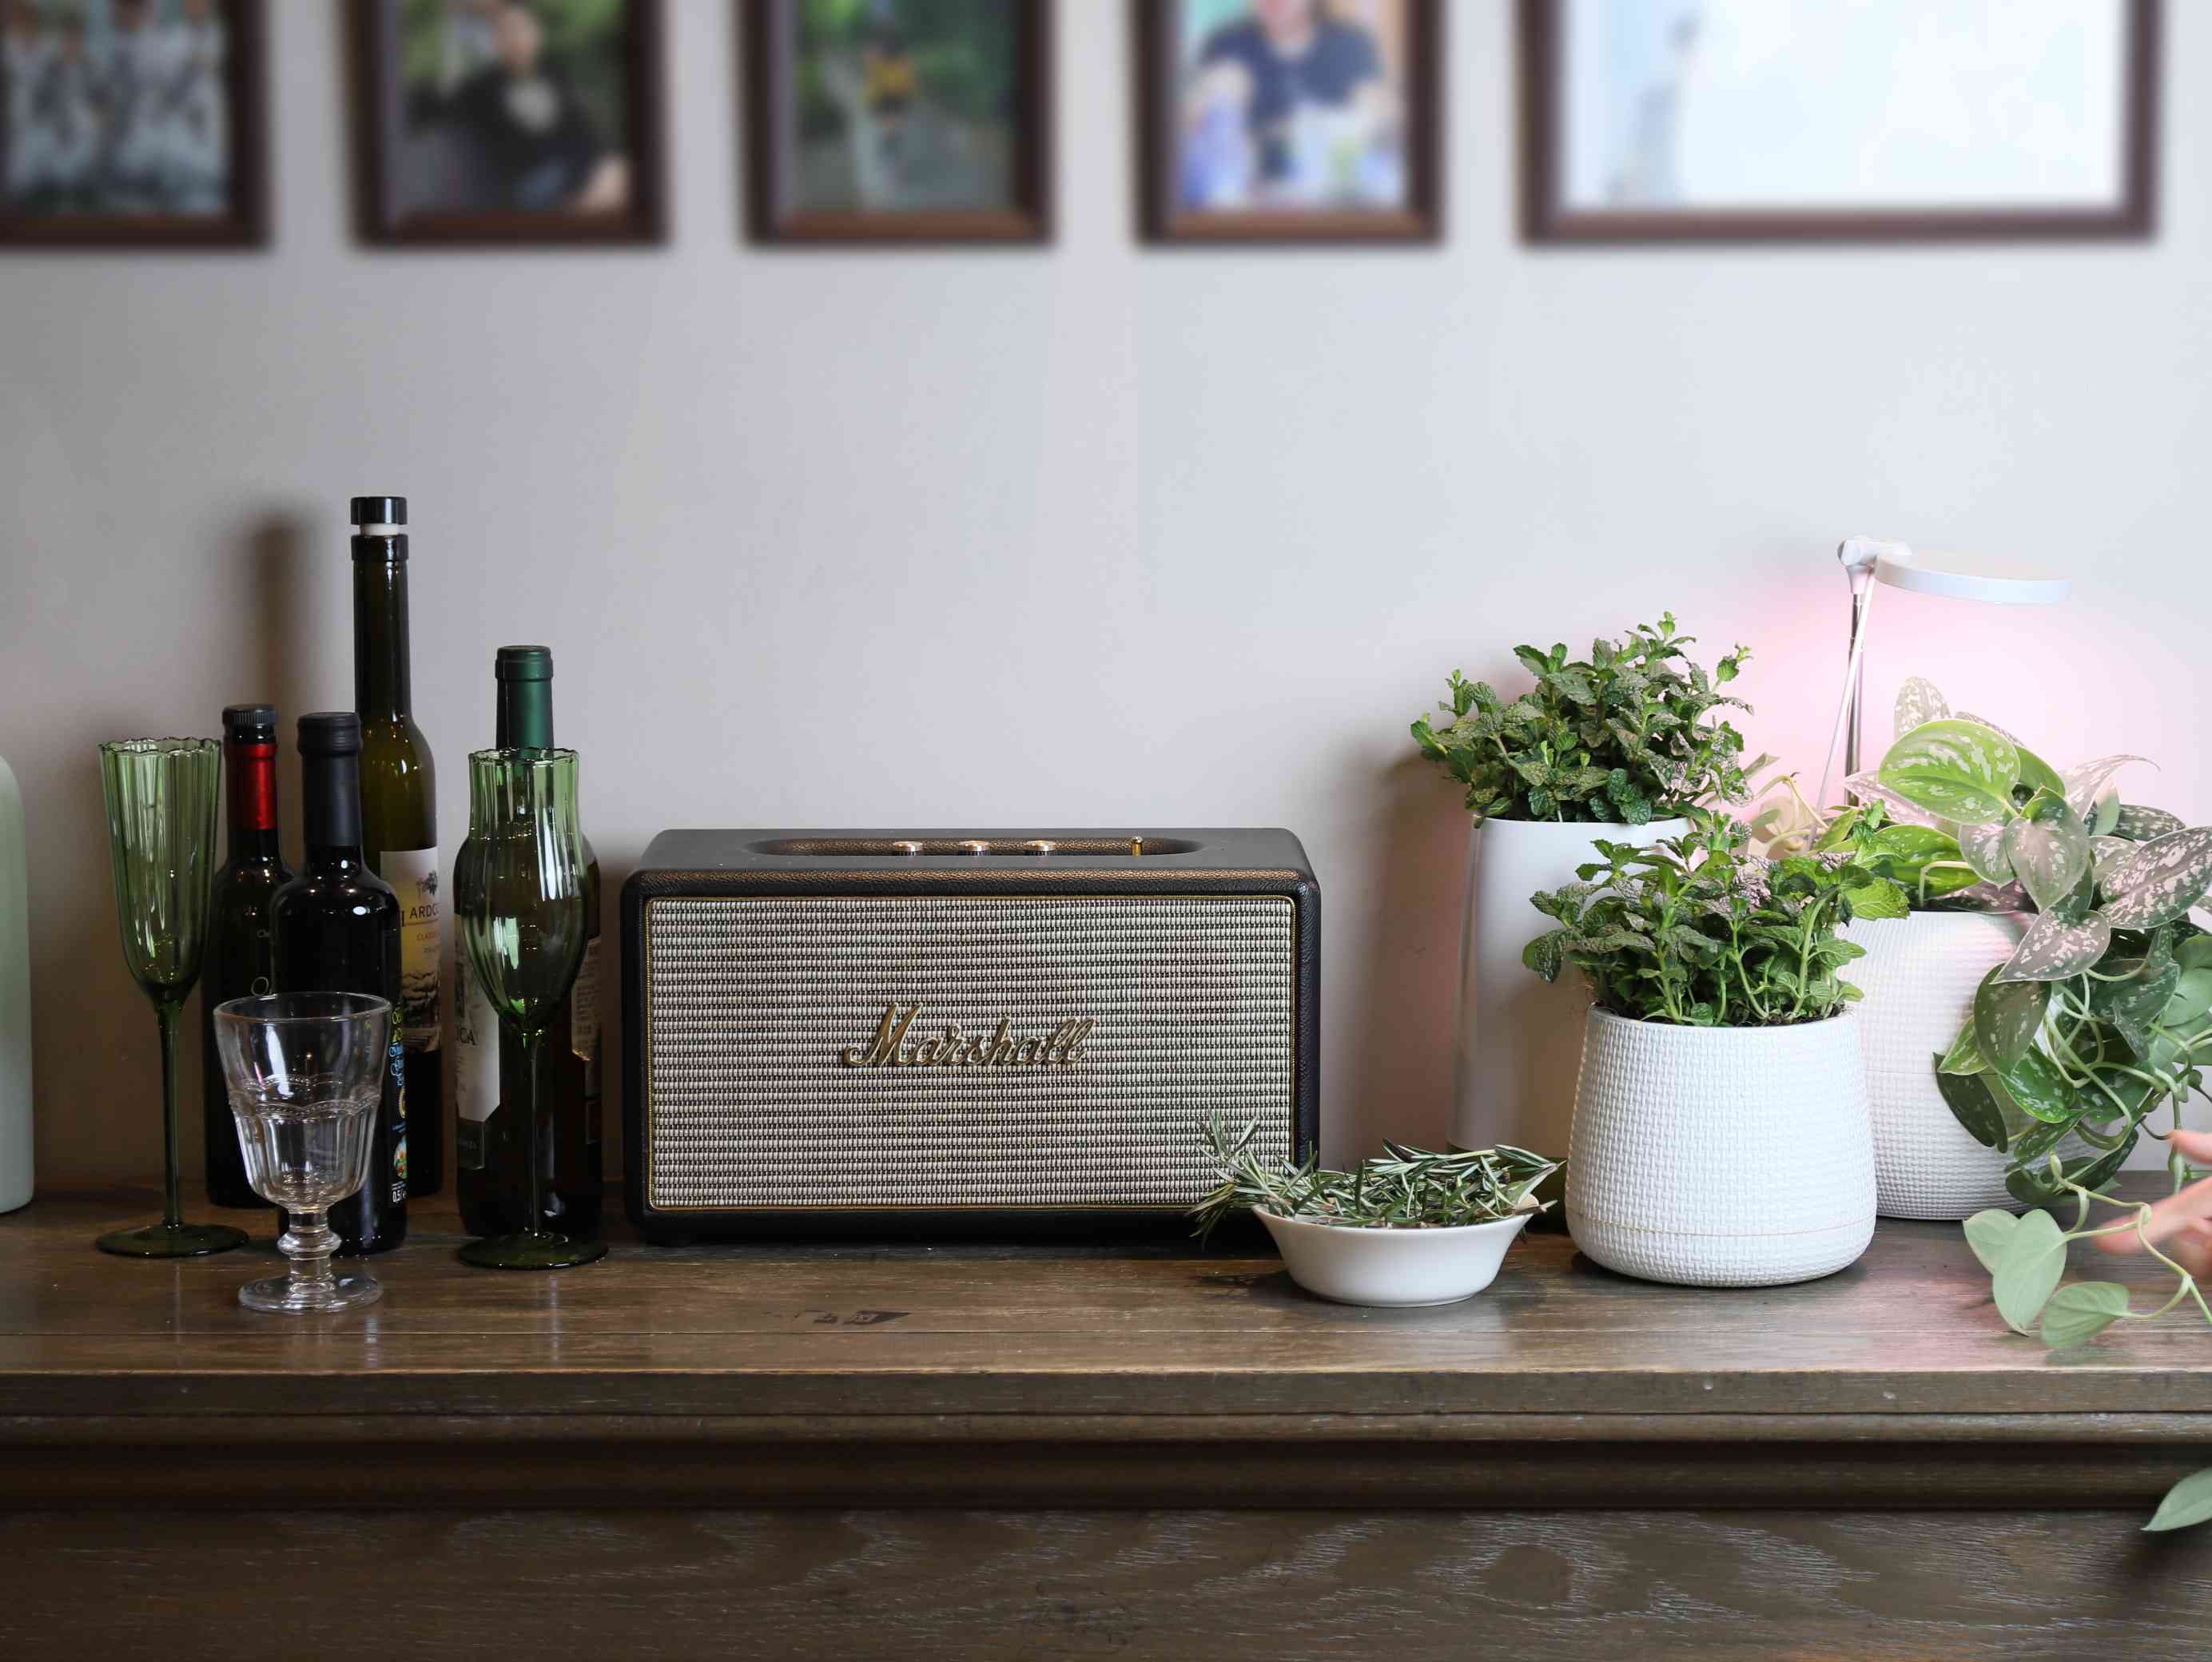 Three Important Reasons to Decorate Your Home with Small Garden